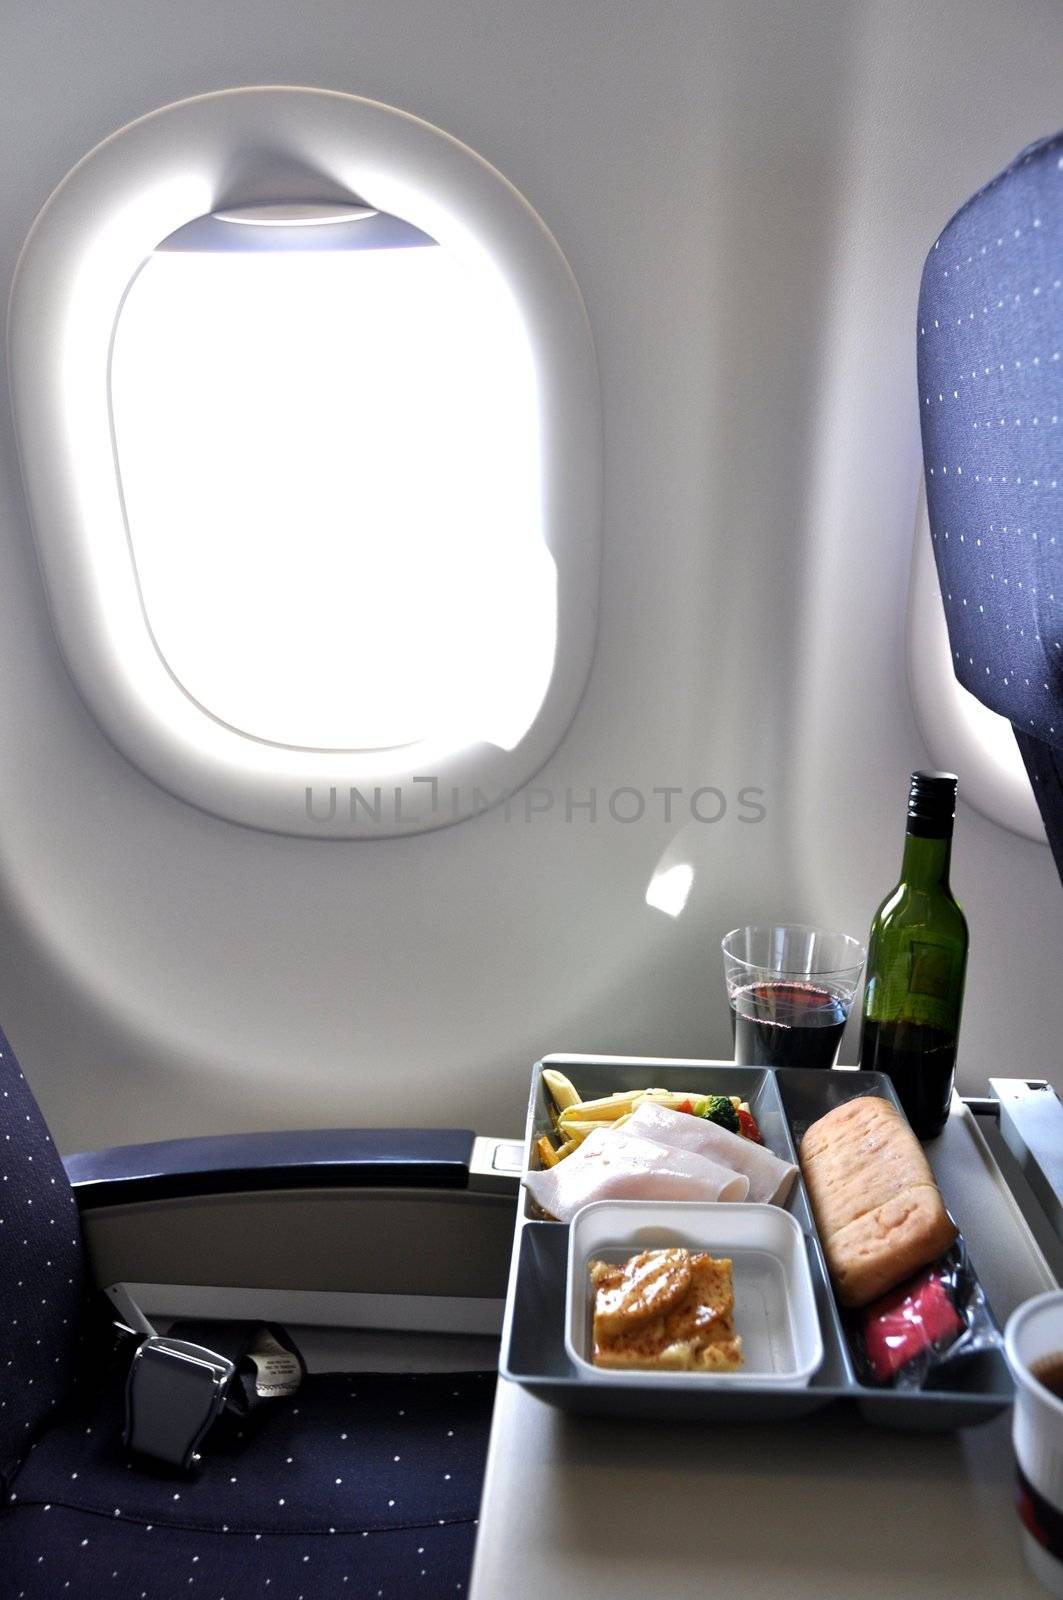 Lunch tray and bottle of wine in an airplane